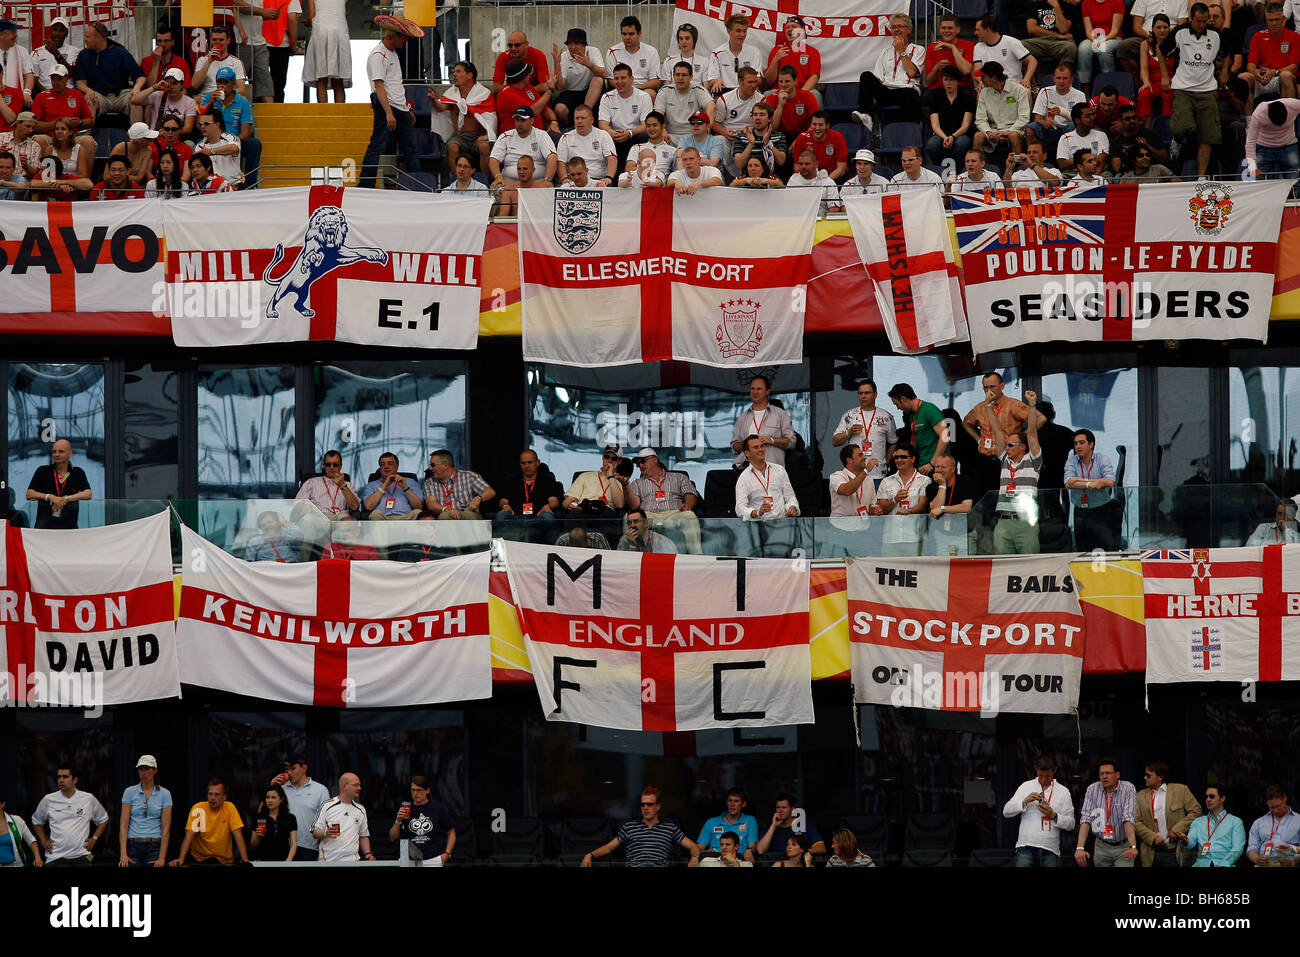 Football fans their flags in the stands at the 2006 Football World Cup Finals Photo - Alamy